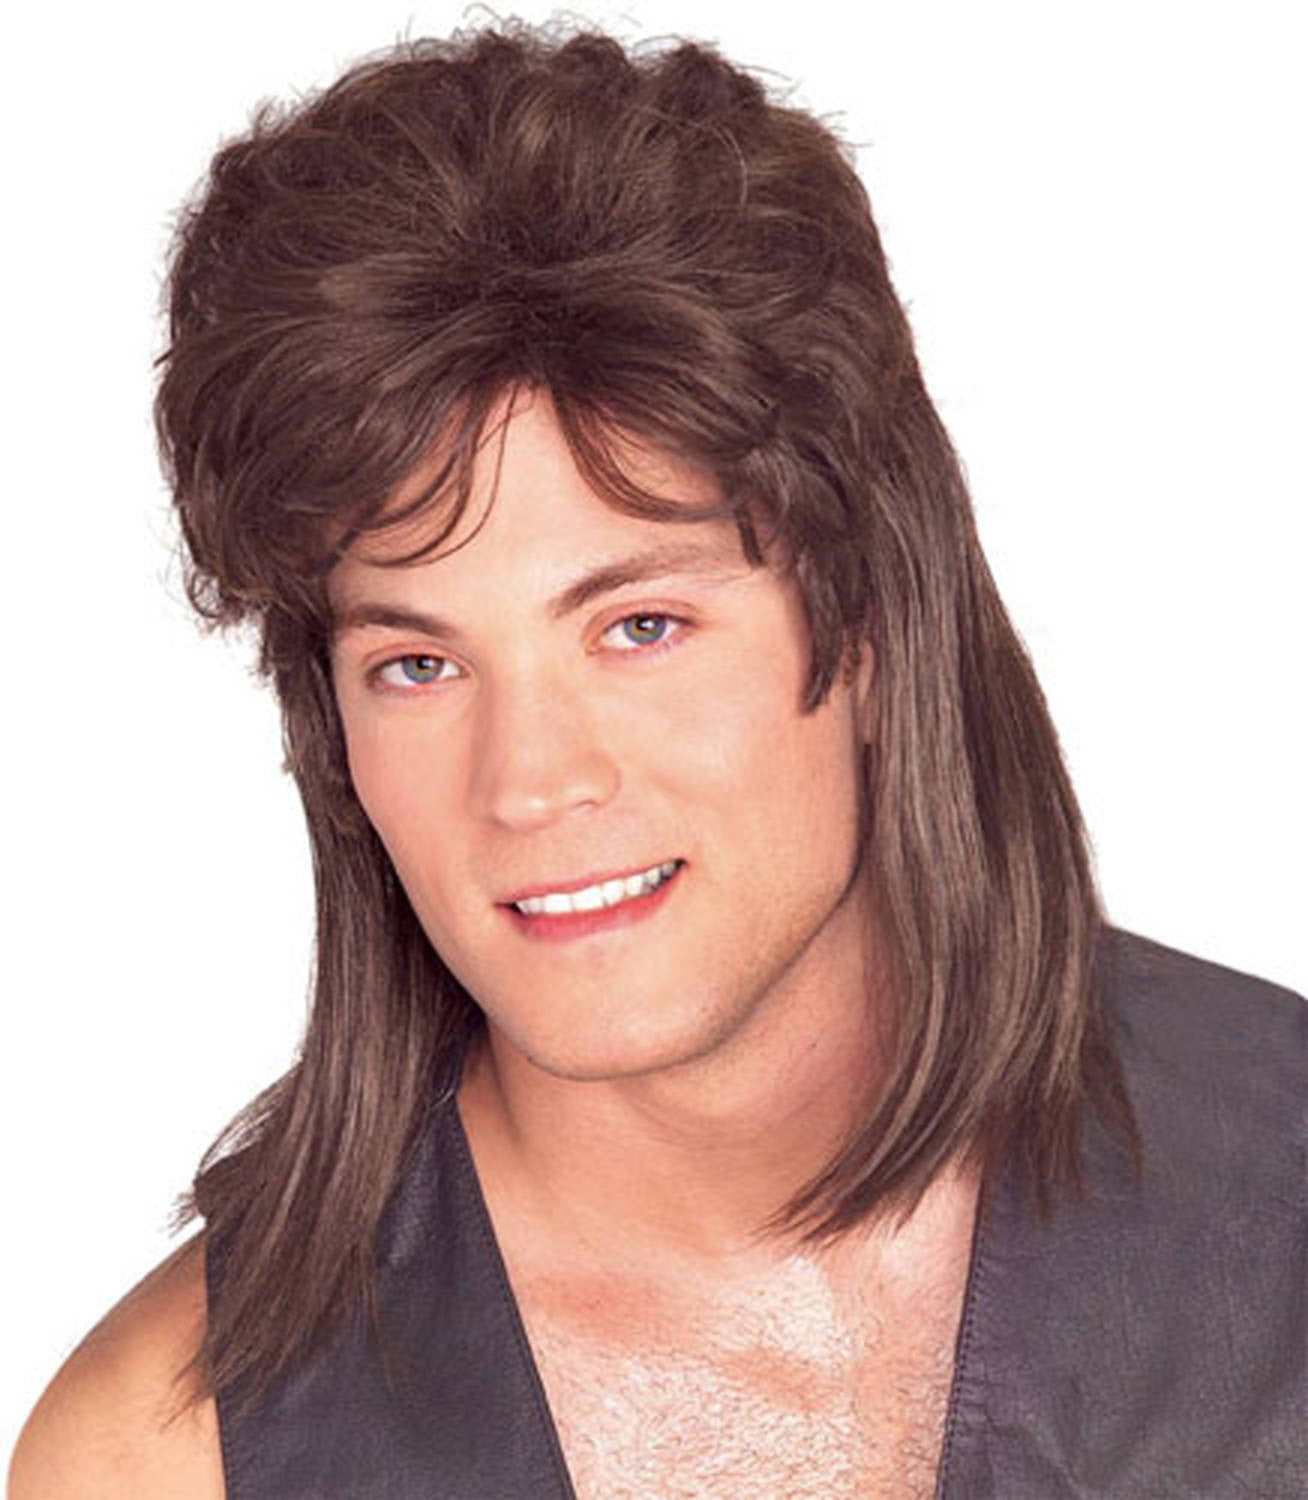 http://www.80stees.com/images/products/Mullet_Blonde-Wig.jpg